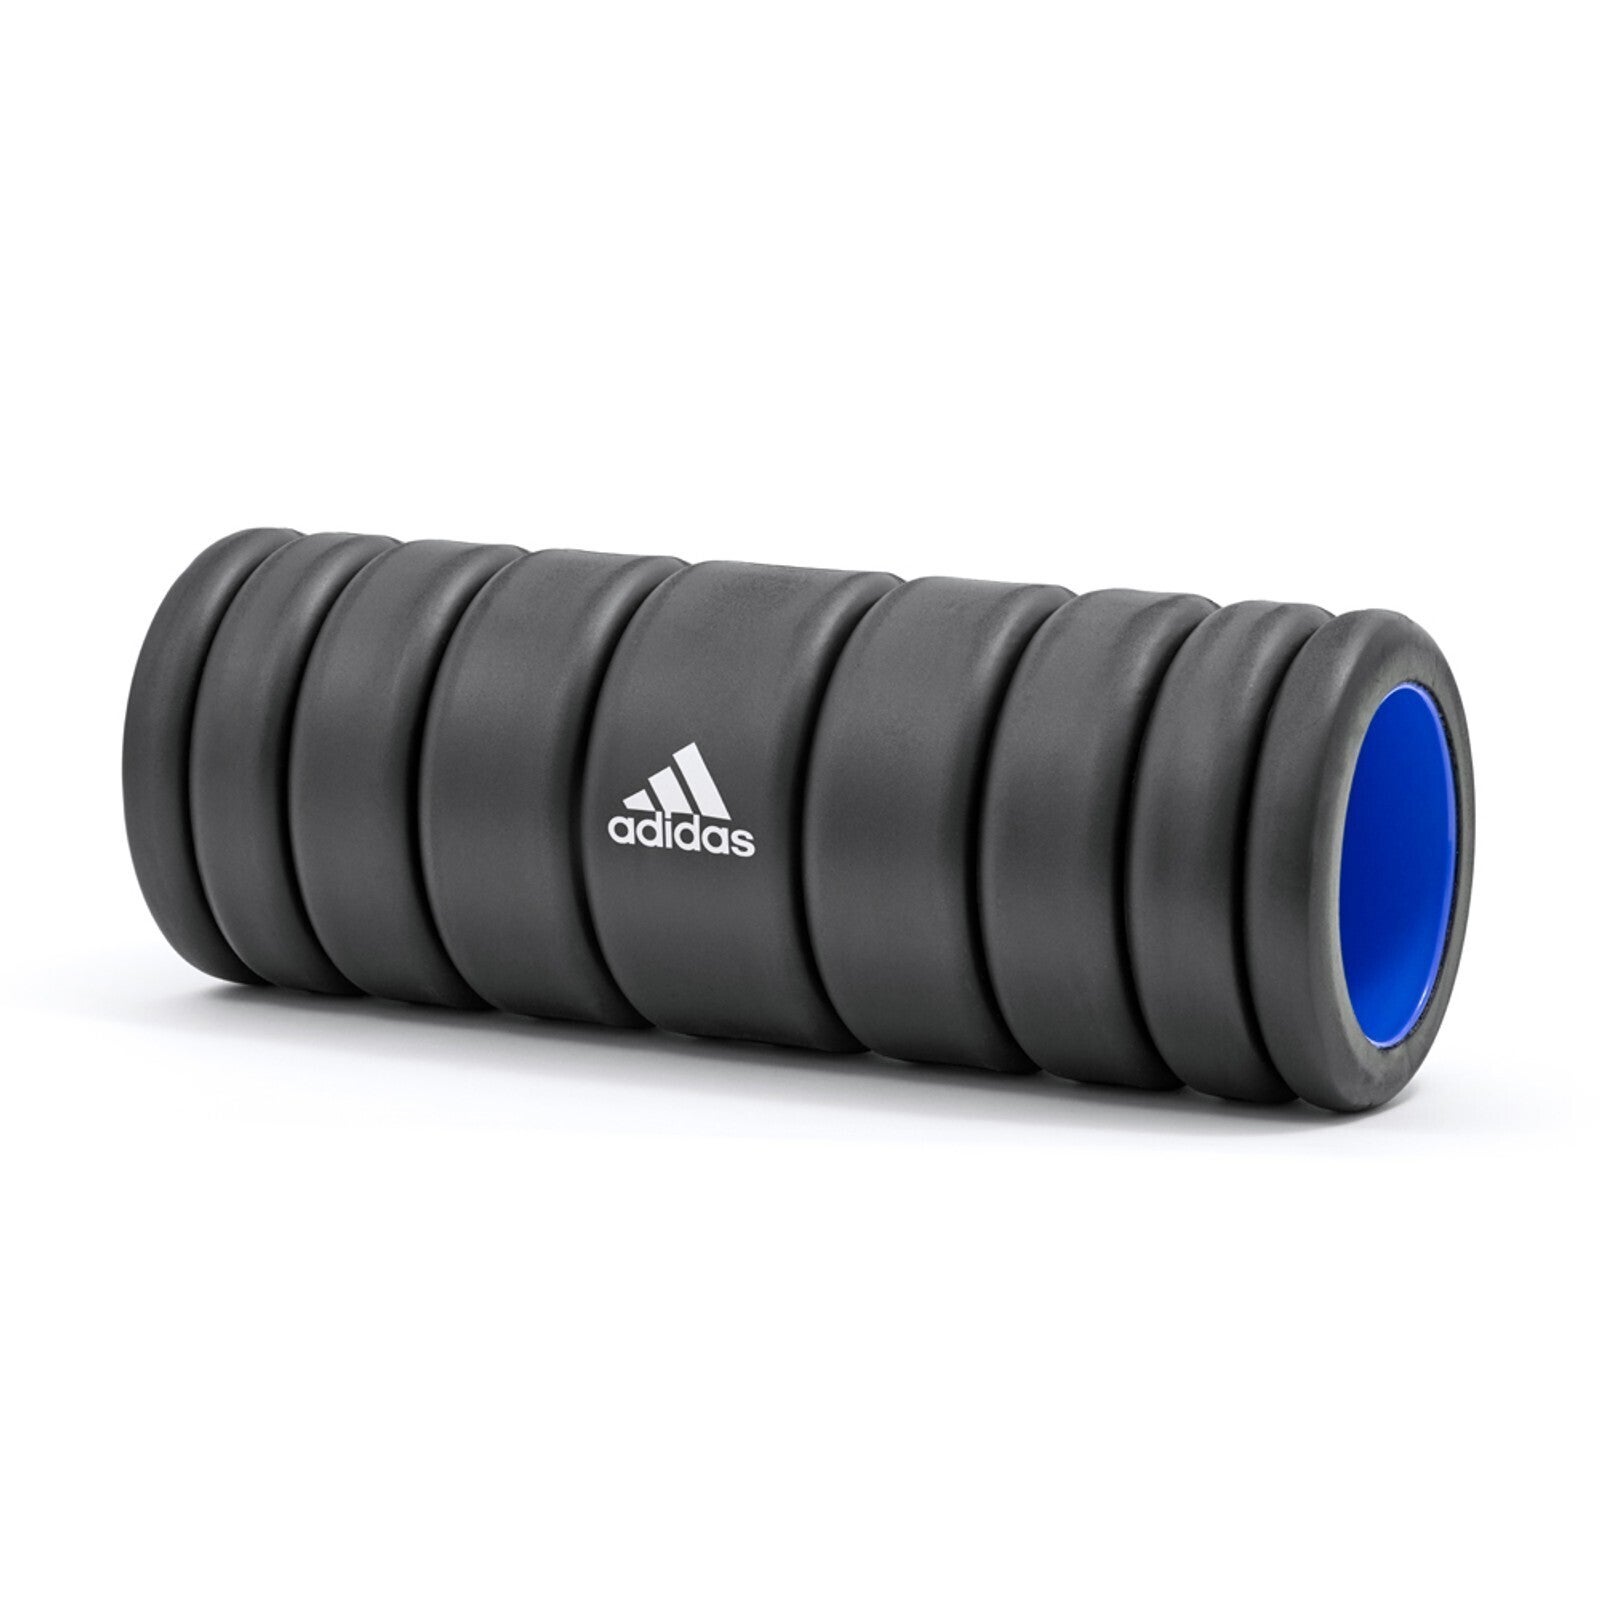 Adidas Foam Roller Recovery Gym Fitness Massage Sport Physio- Blue Core